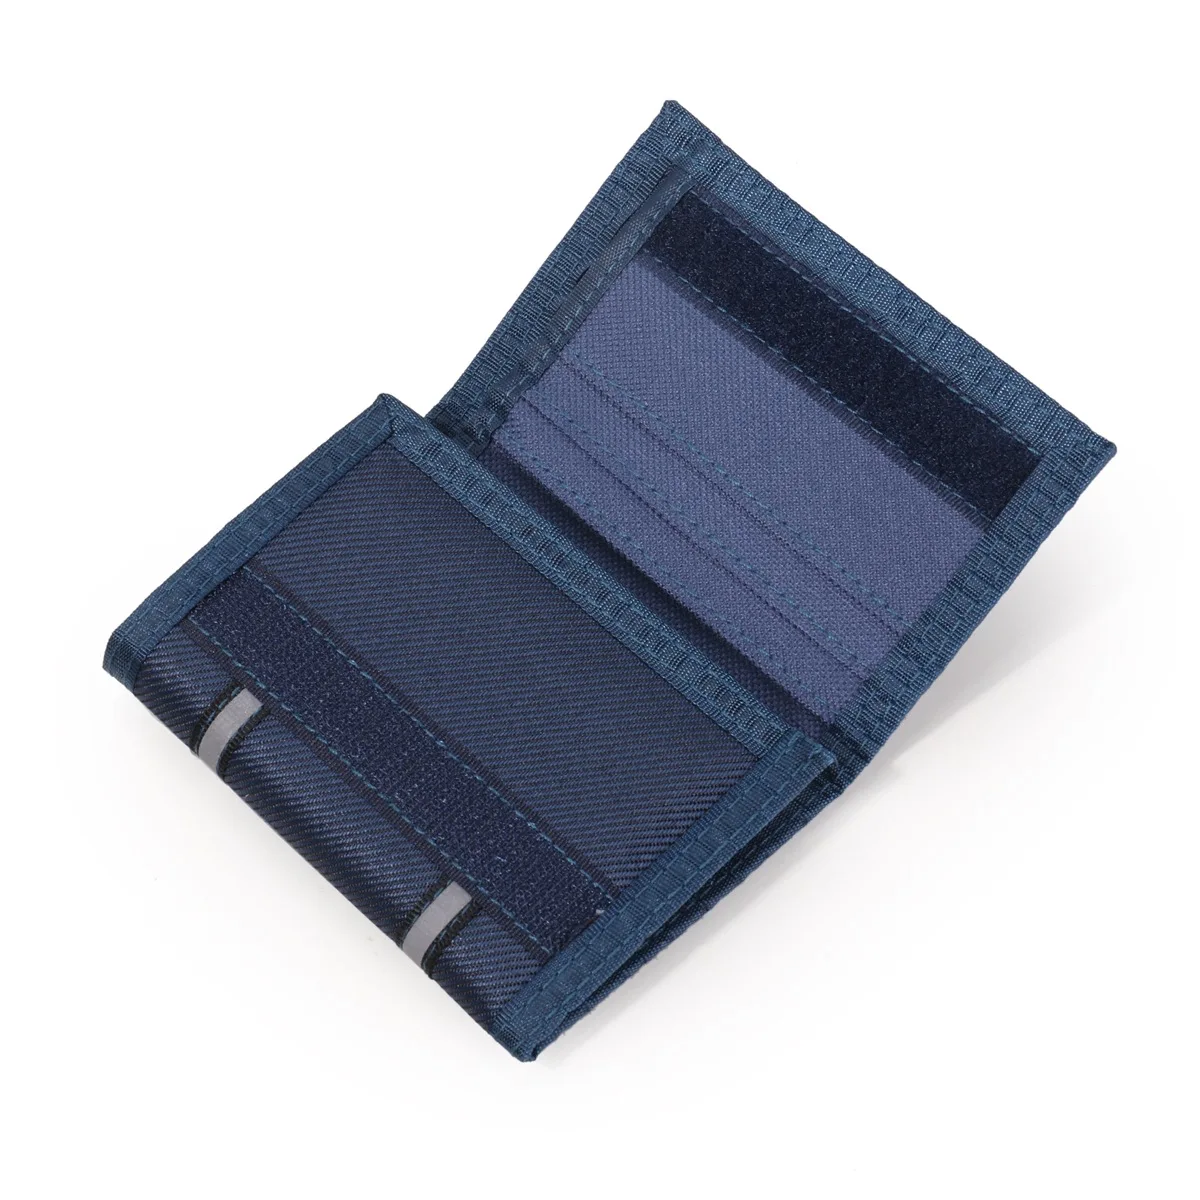 Buy the best fabric wallets online from Mochi Shoes